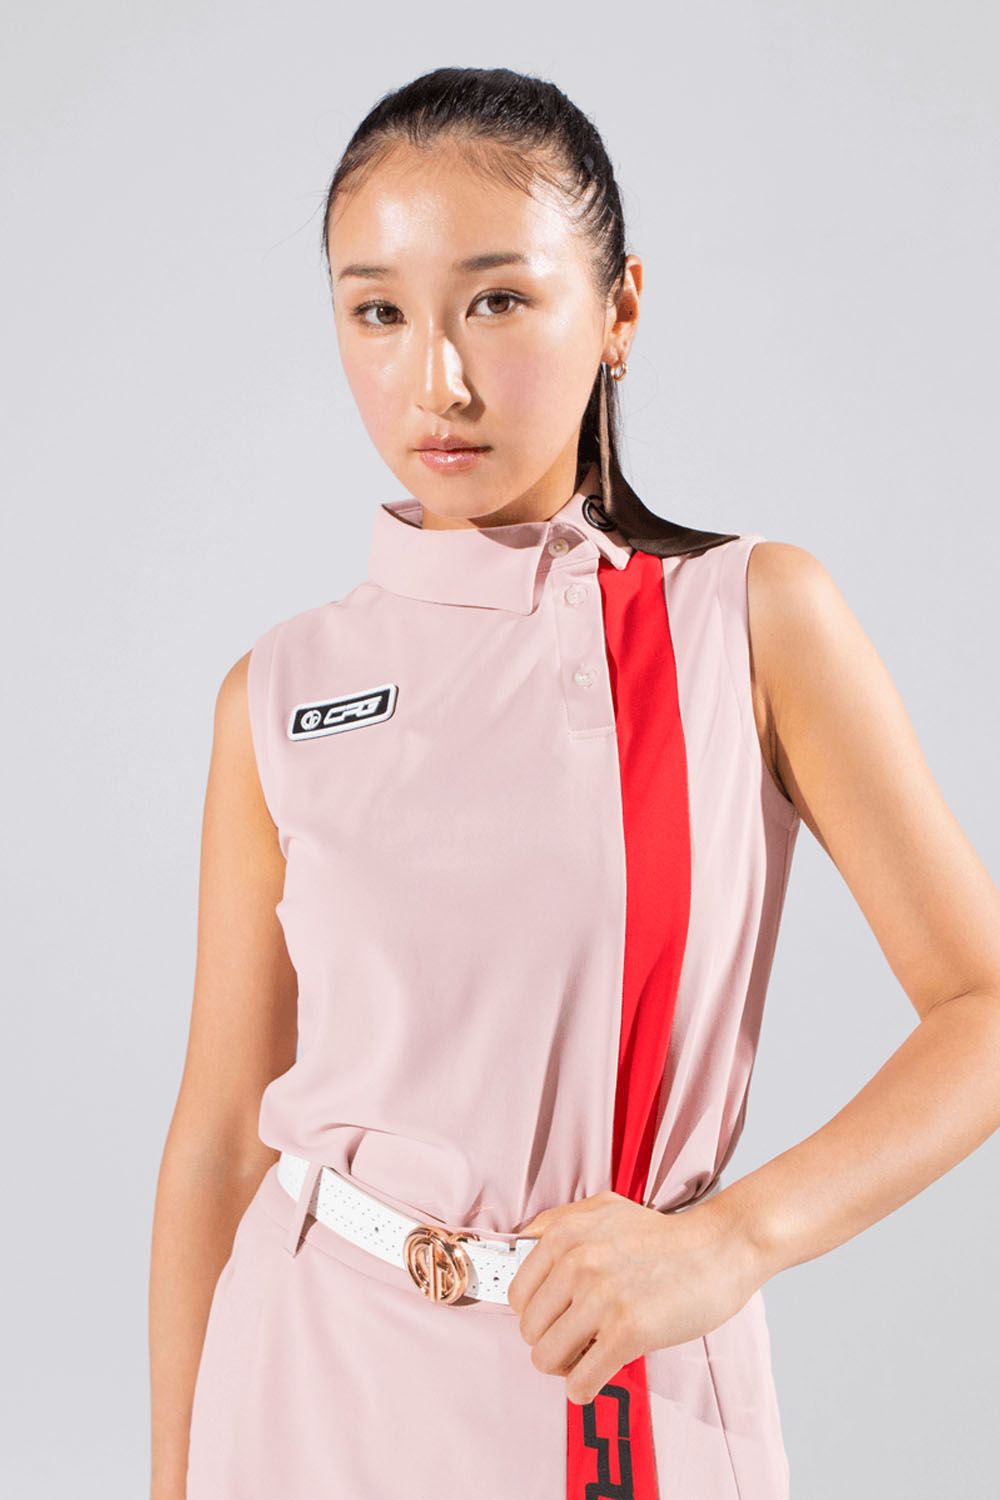 CPG GOLF - 【レディース】 BICOLOR SLEEVELESS MOCK NECK with RC ...